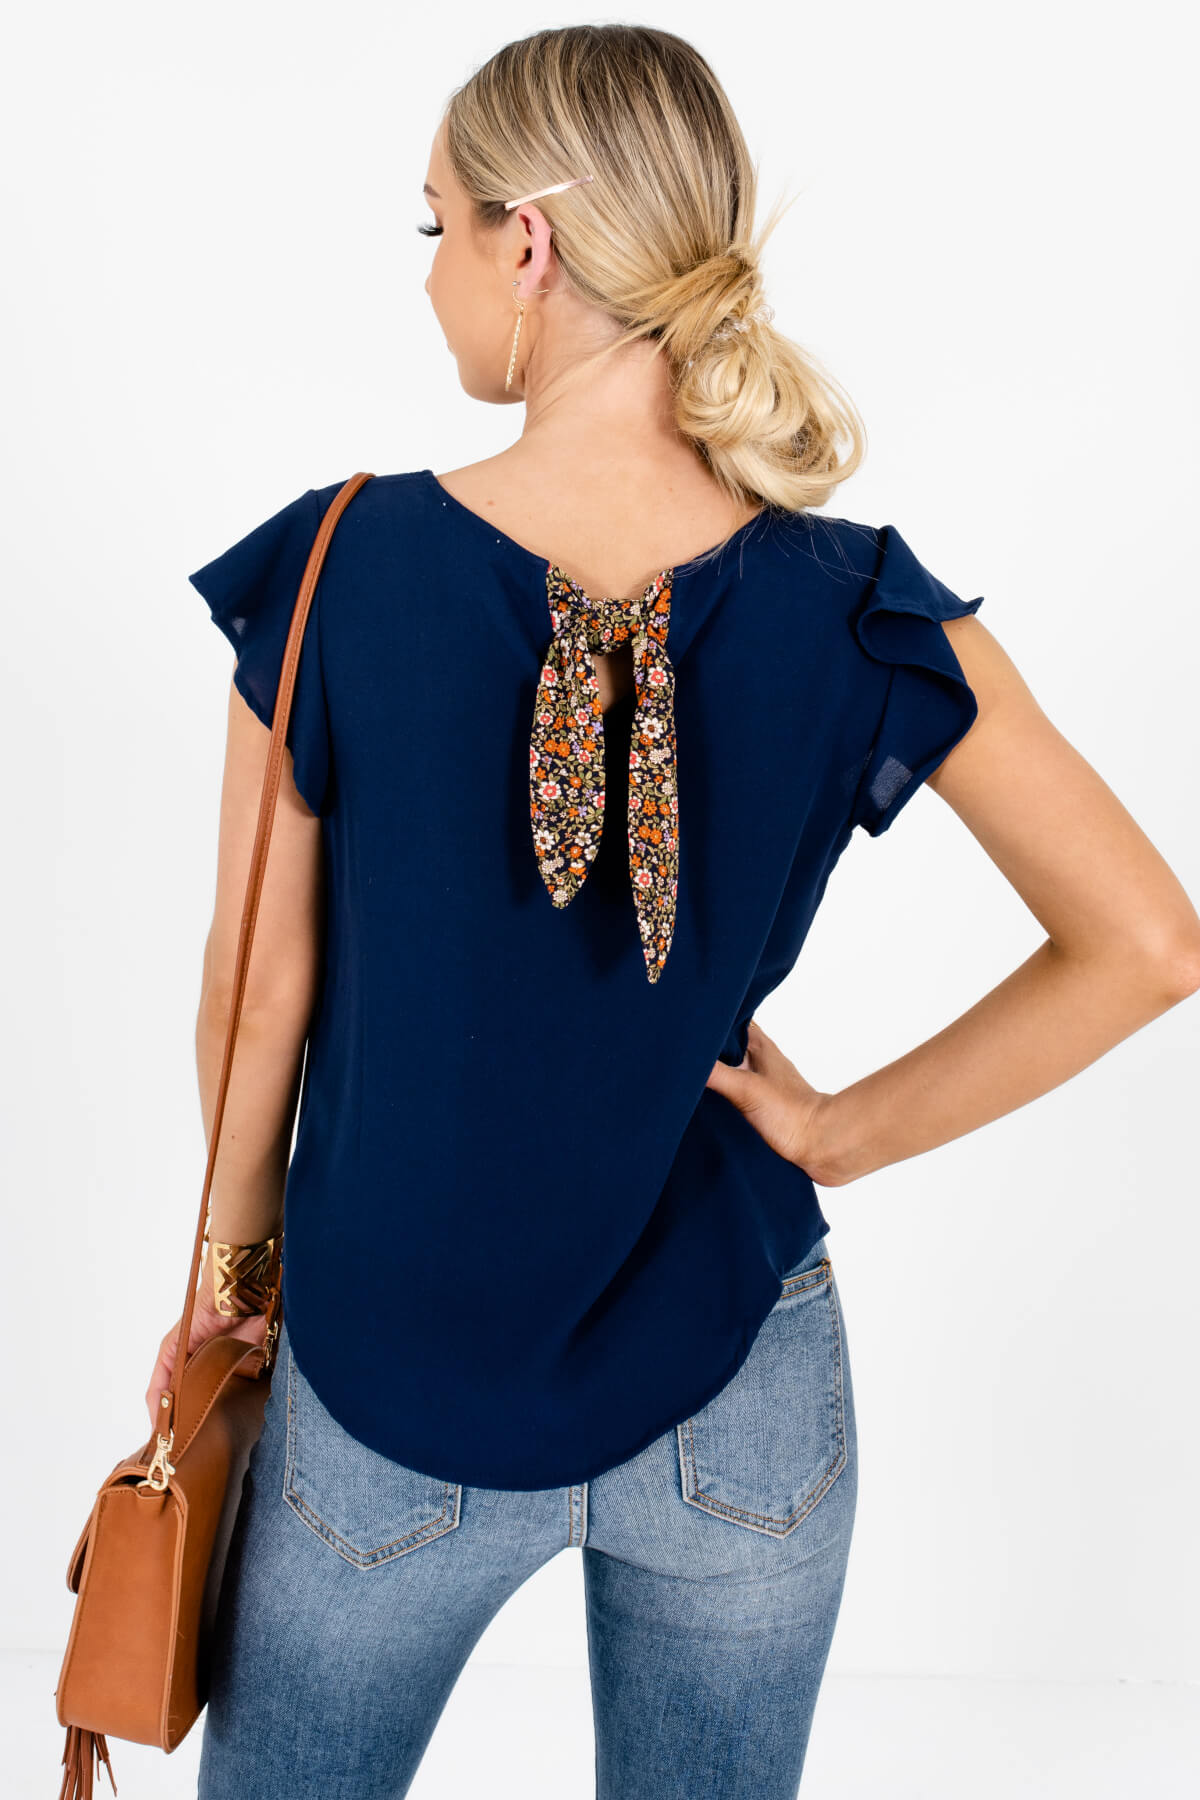 Navy Blue Flutter Sleeve Button-Up Blouses with Floral Tie Detail